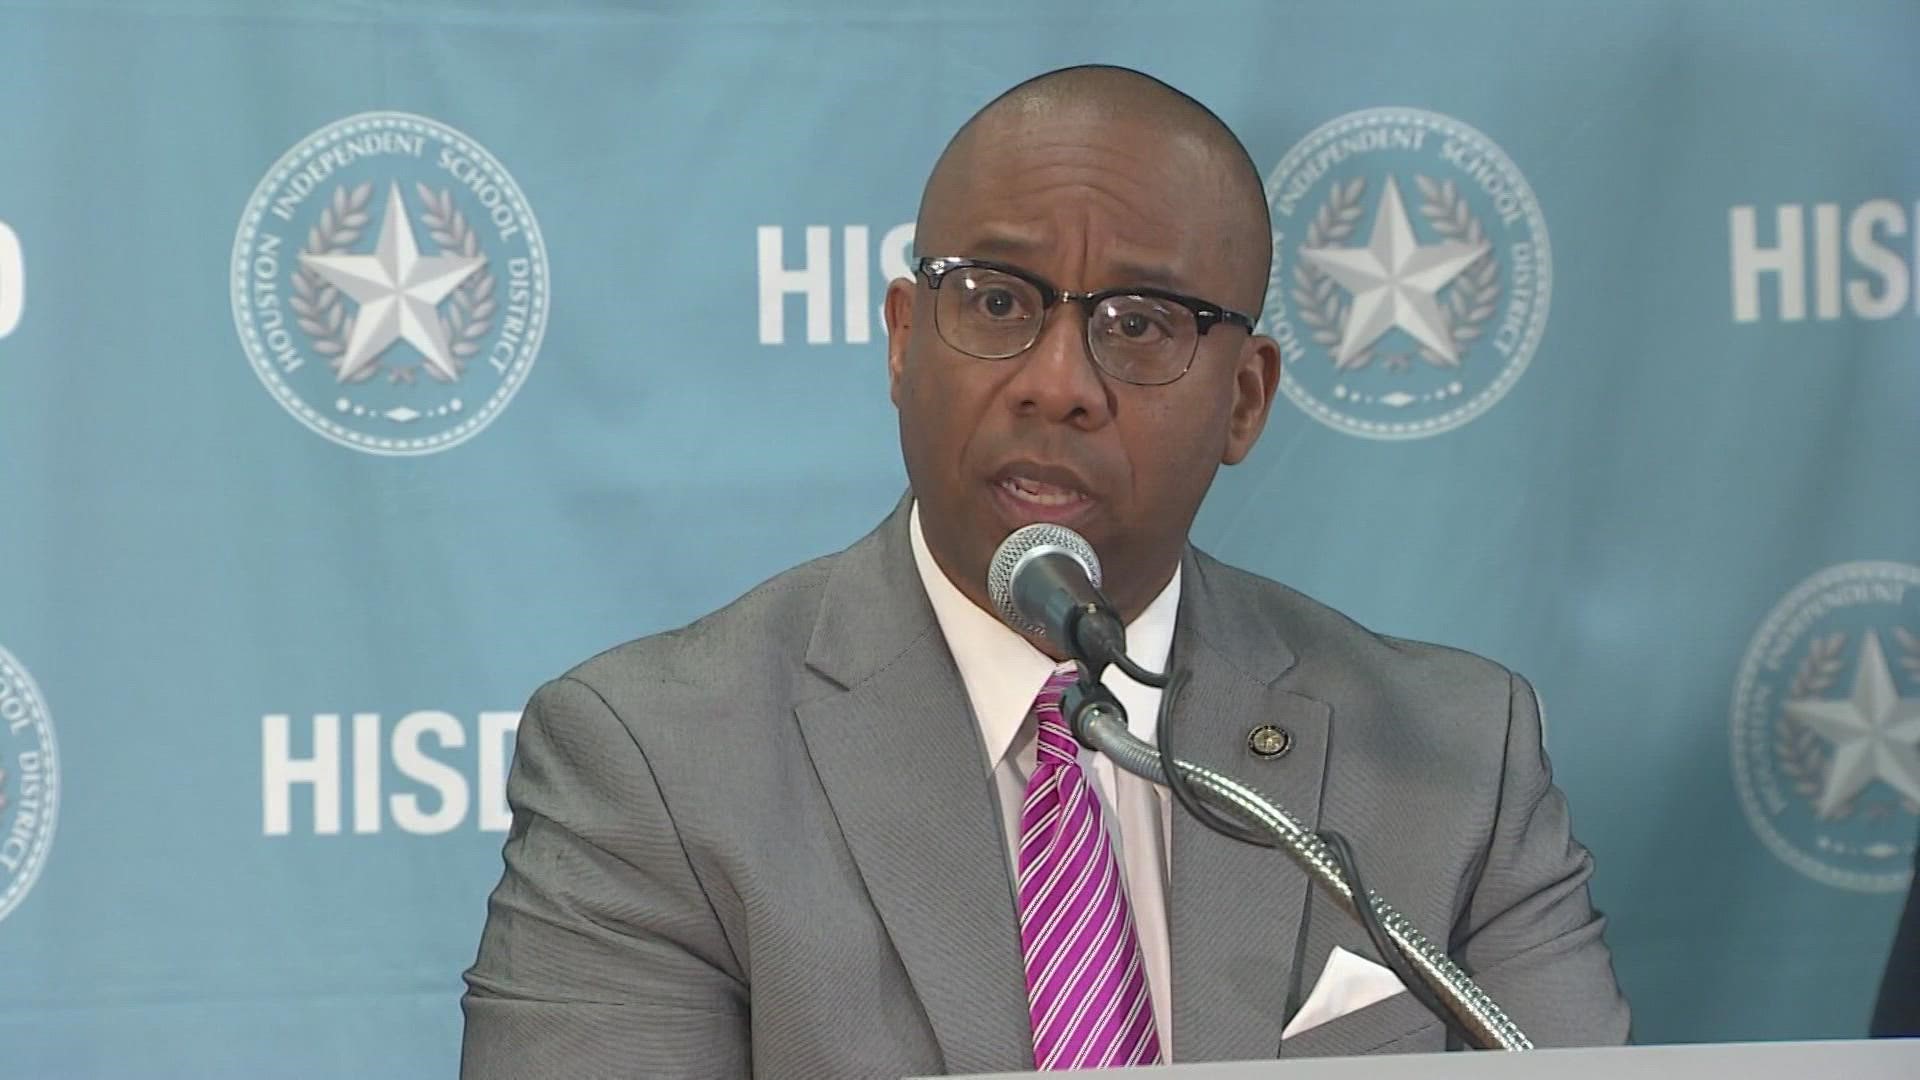 Last week, HISD's Millard House II said the district wasn't prepared for an active shooter threat. On Thursday, the school board will vote to equip officers.